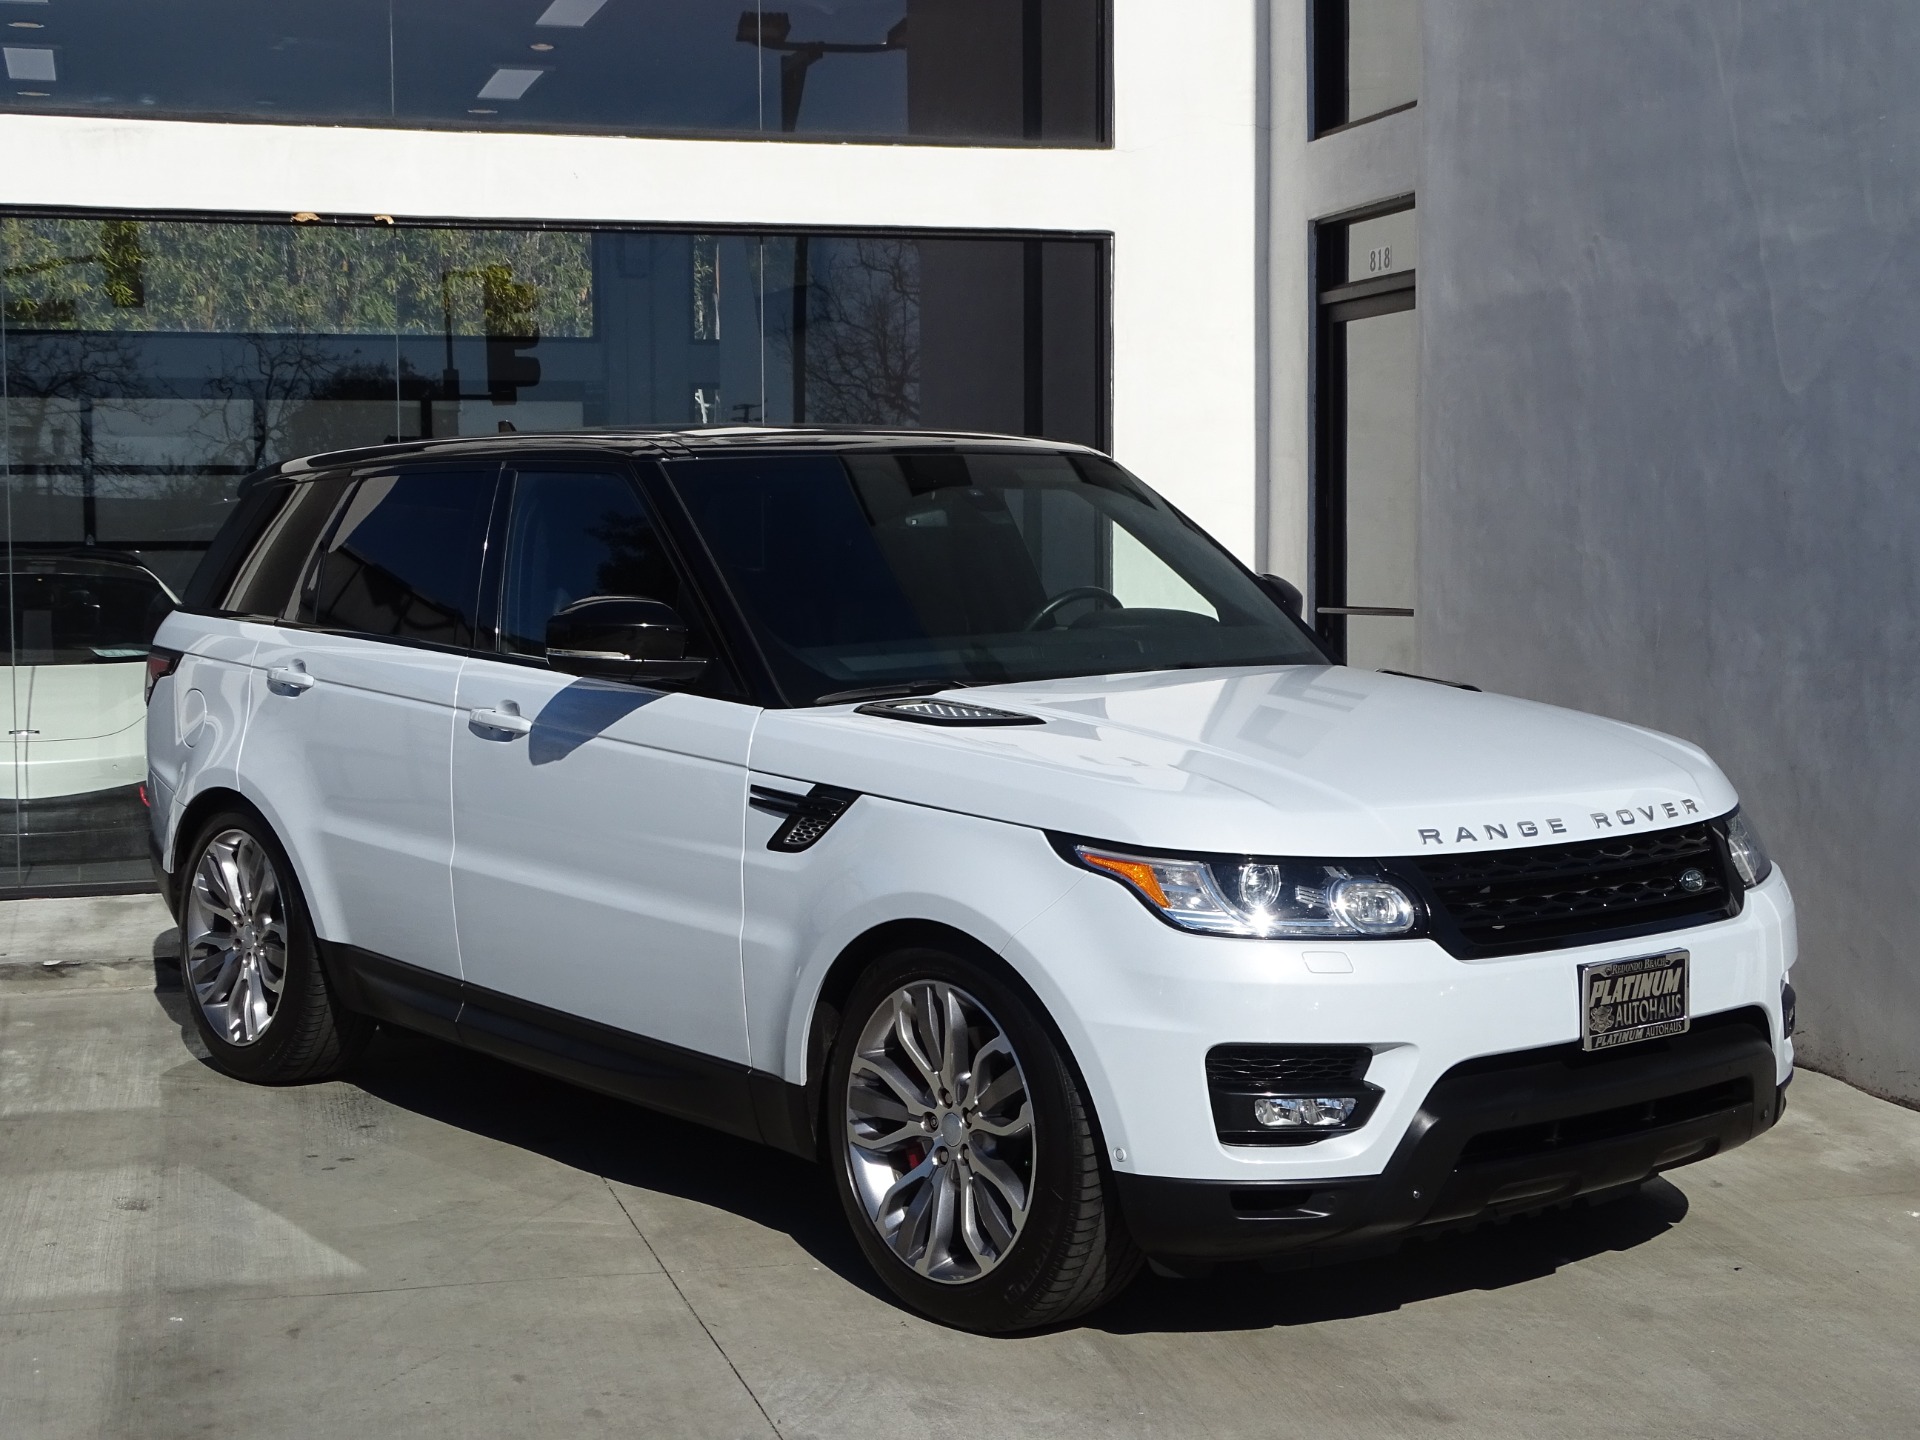 2015 Rover Range Rover Sport Supercharged Limited Edition Stock # 6841 for sale near Beach, CA | CA Land Dealer